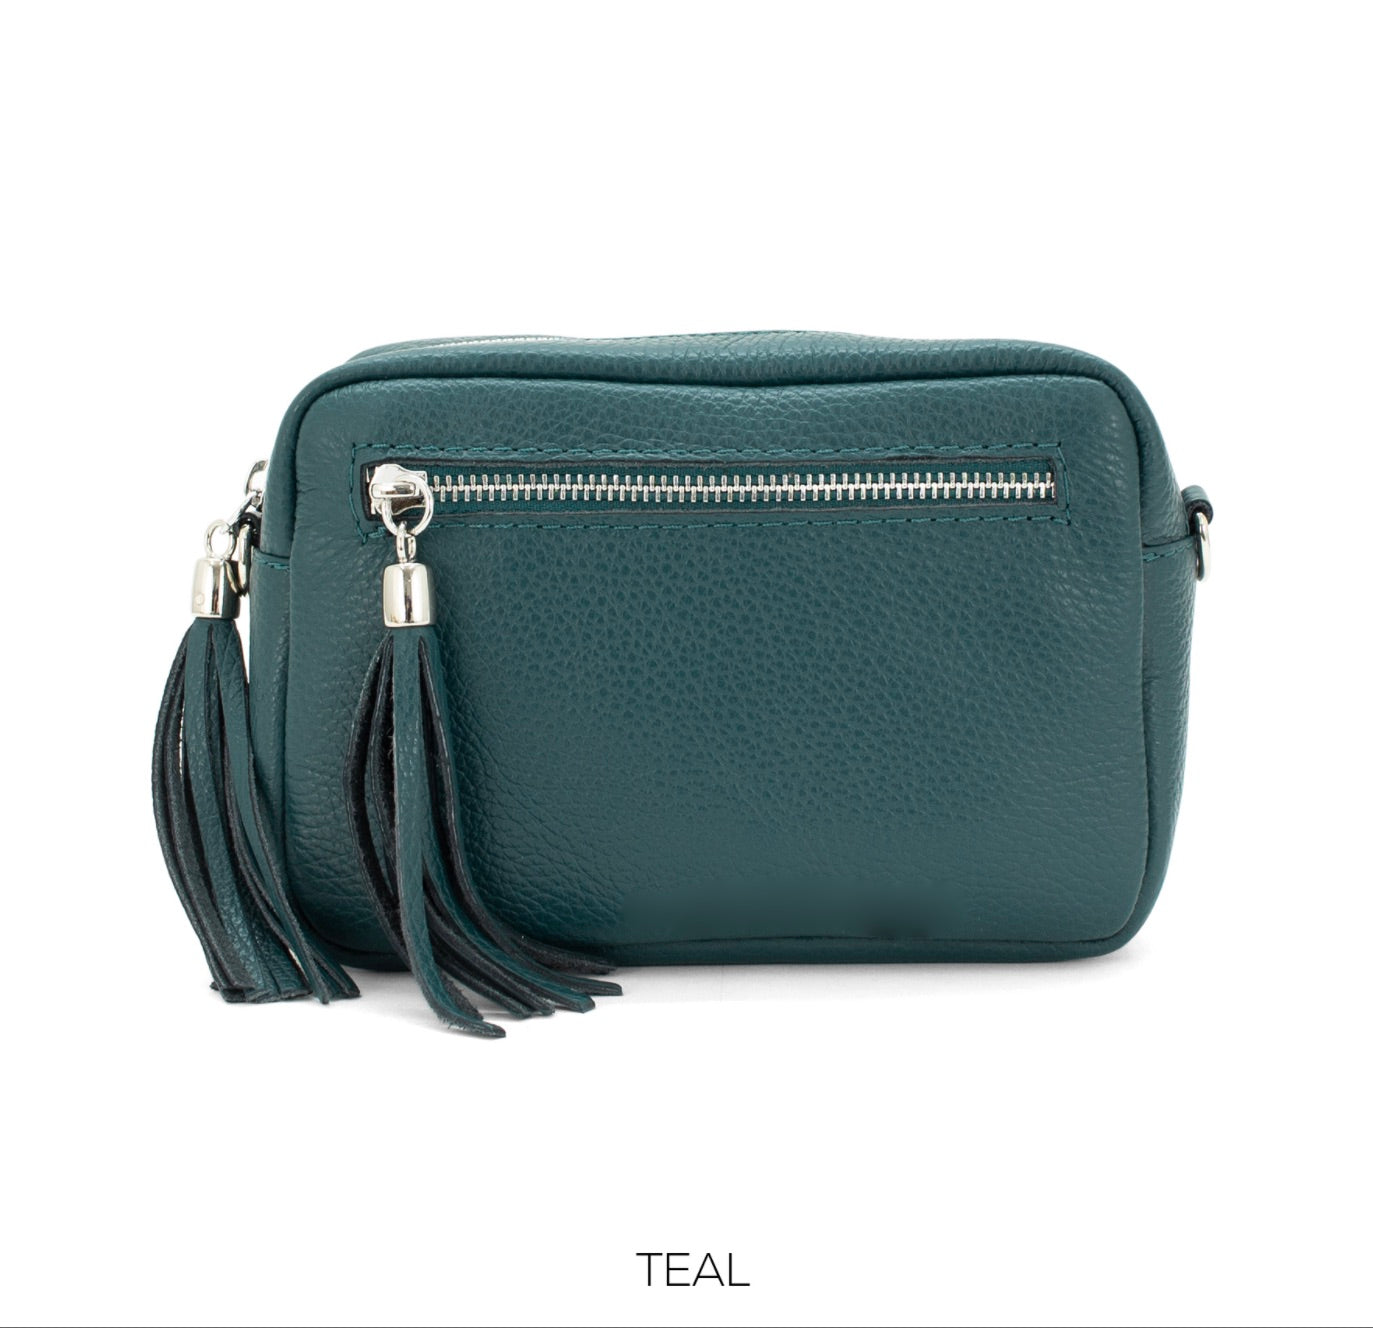 Leather Crossbody Bag With Detachable Strap